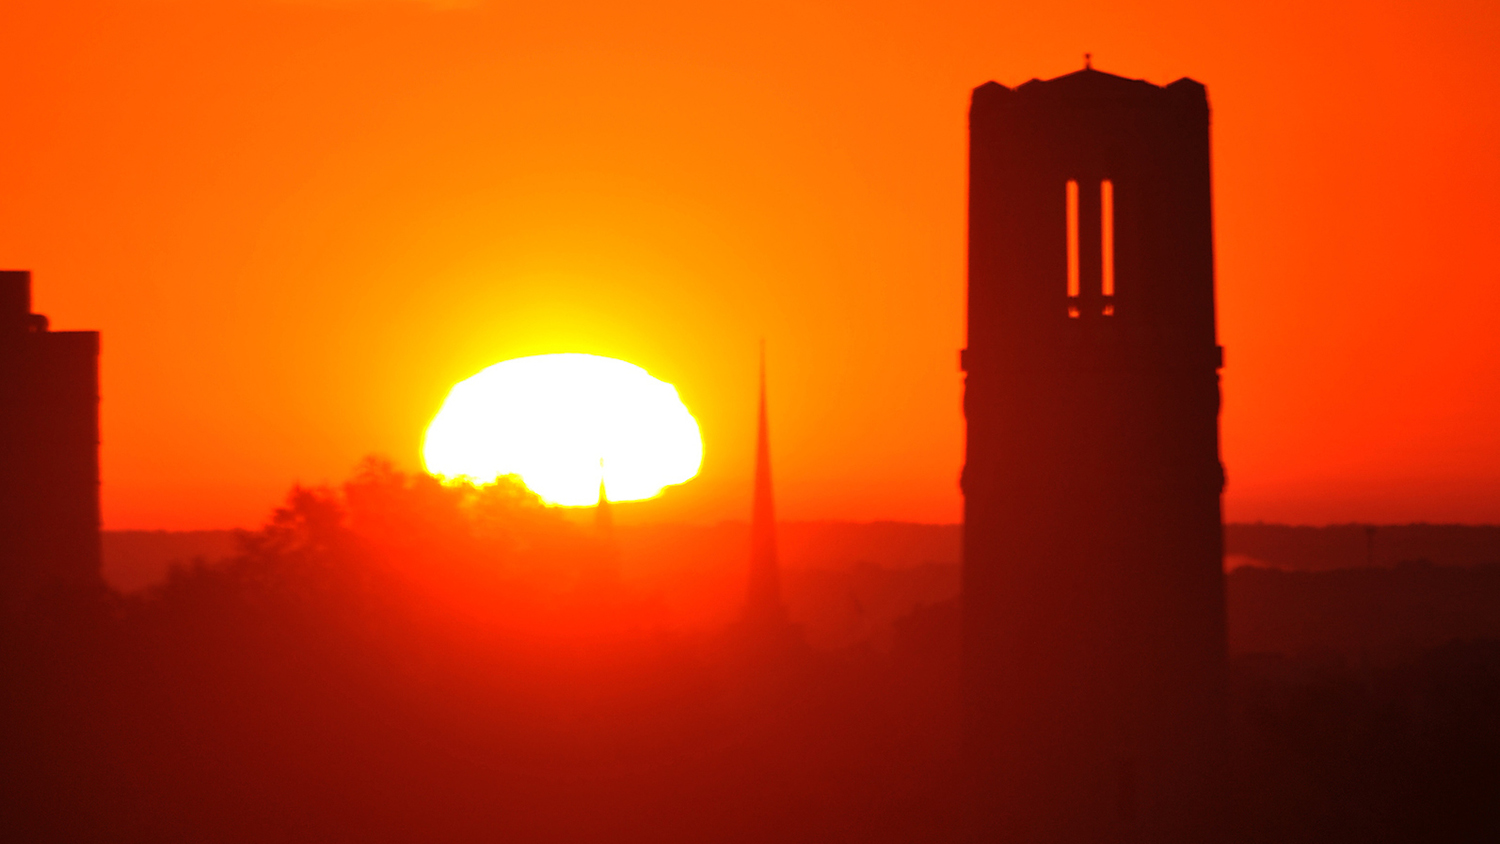 Sunrise over the bell tower - Industry Partnership to Assess Climate Change Risks - College of Natural Resources NC State University